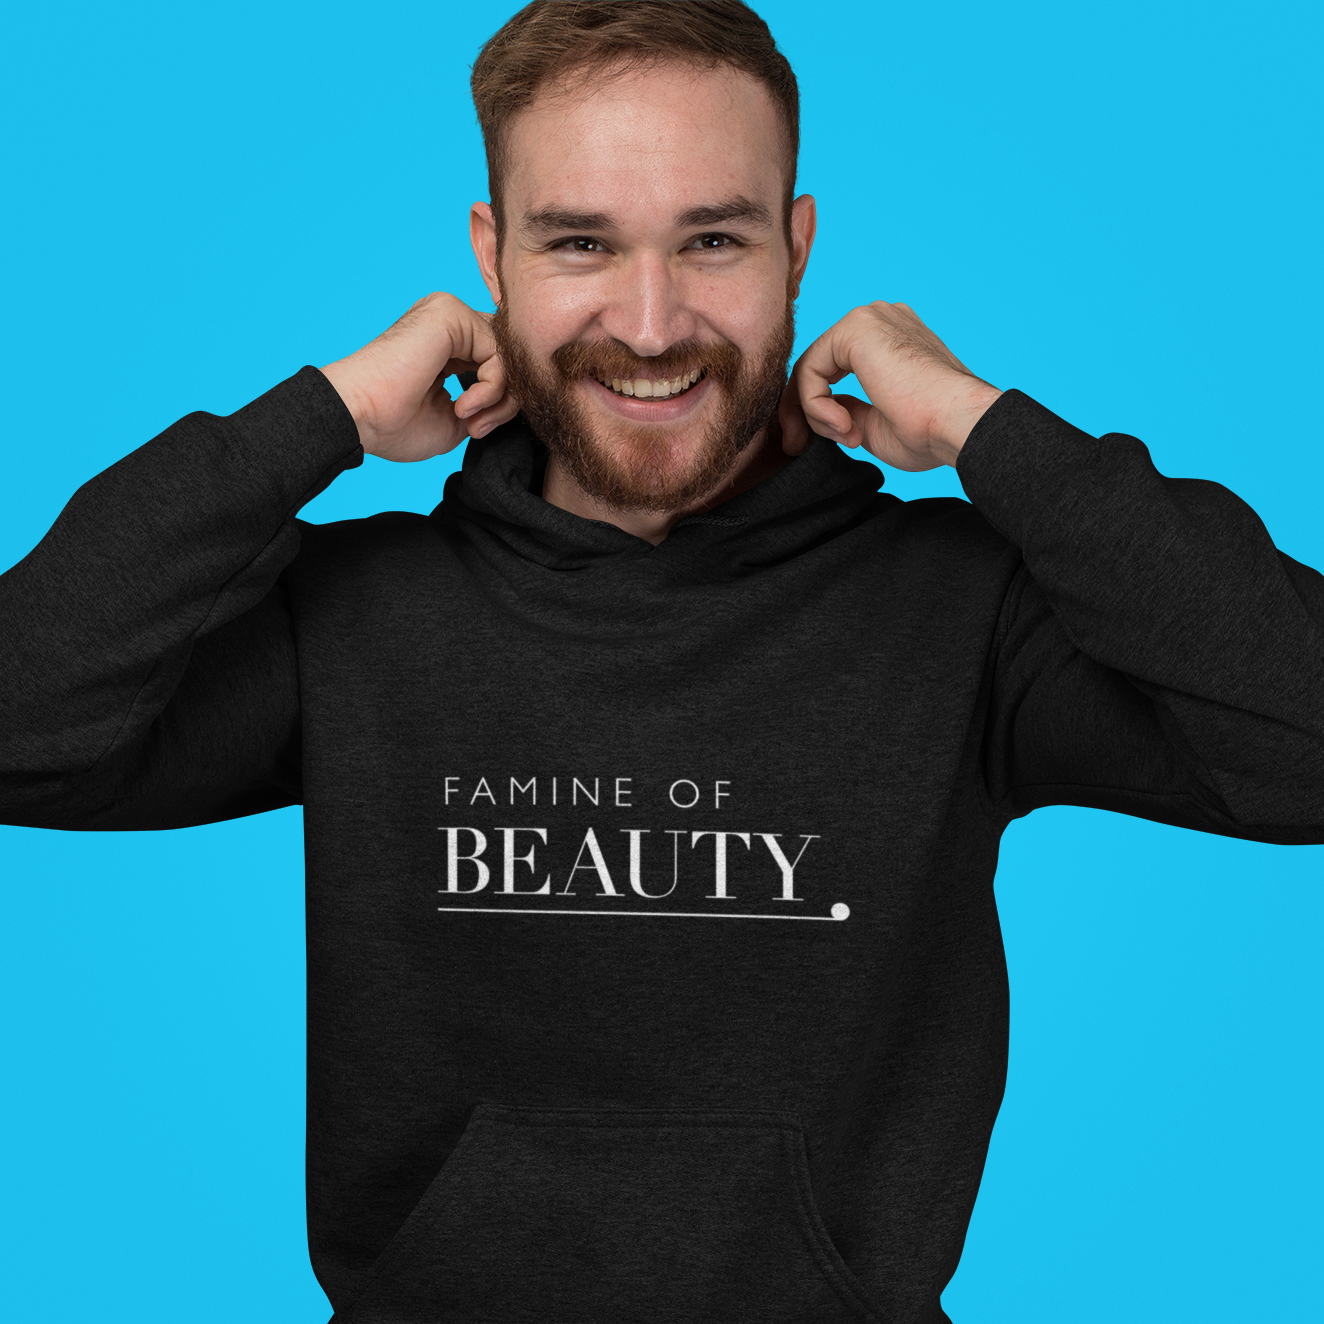 The Maxi Branded Beauty - Hoodies